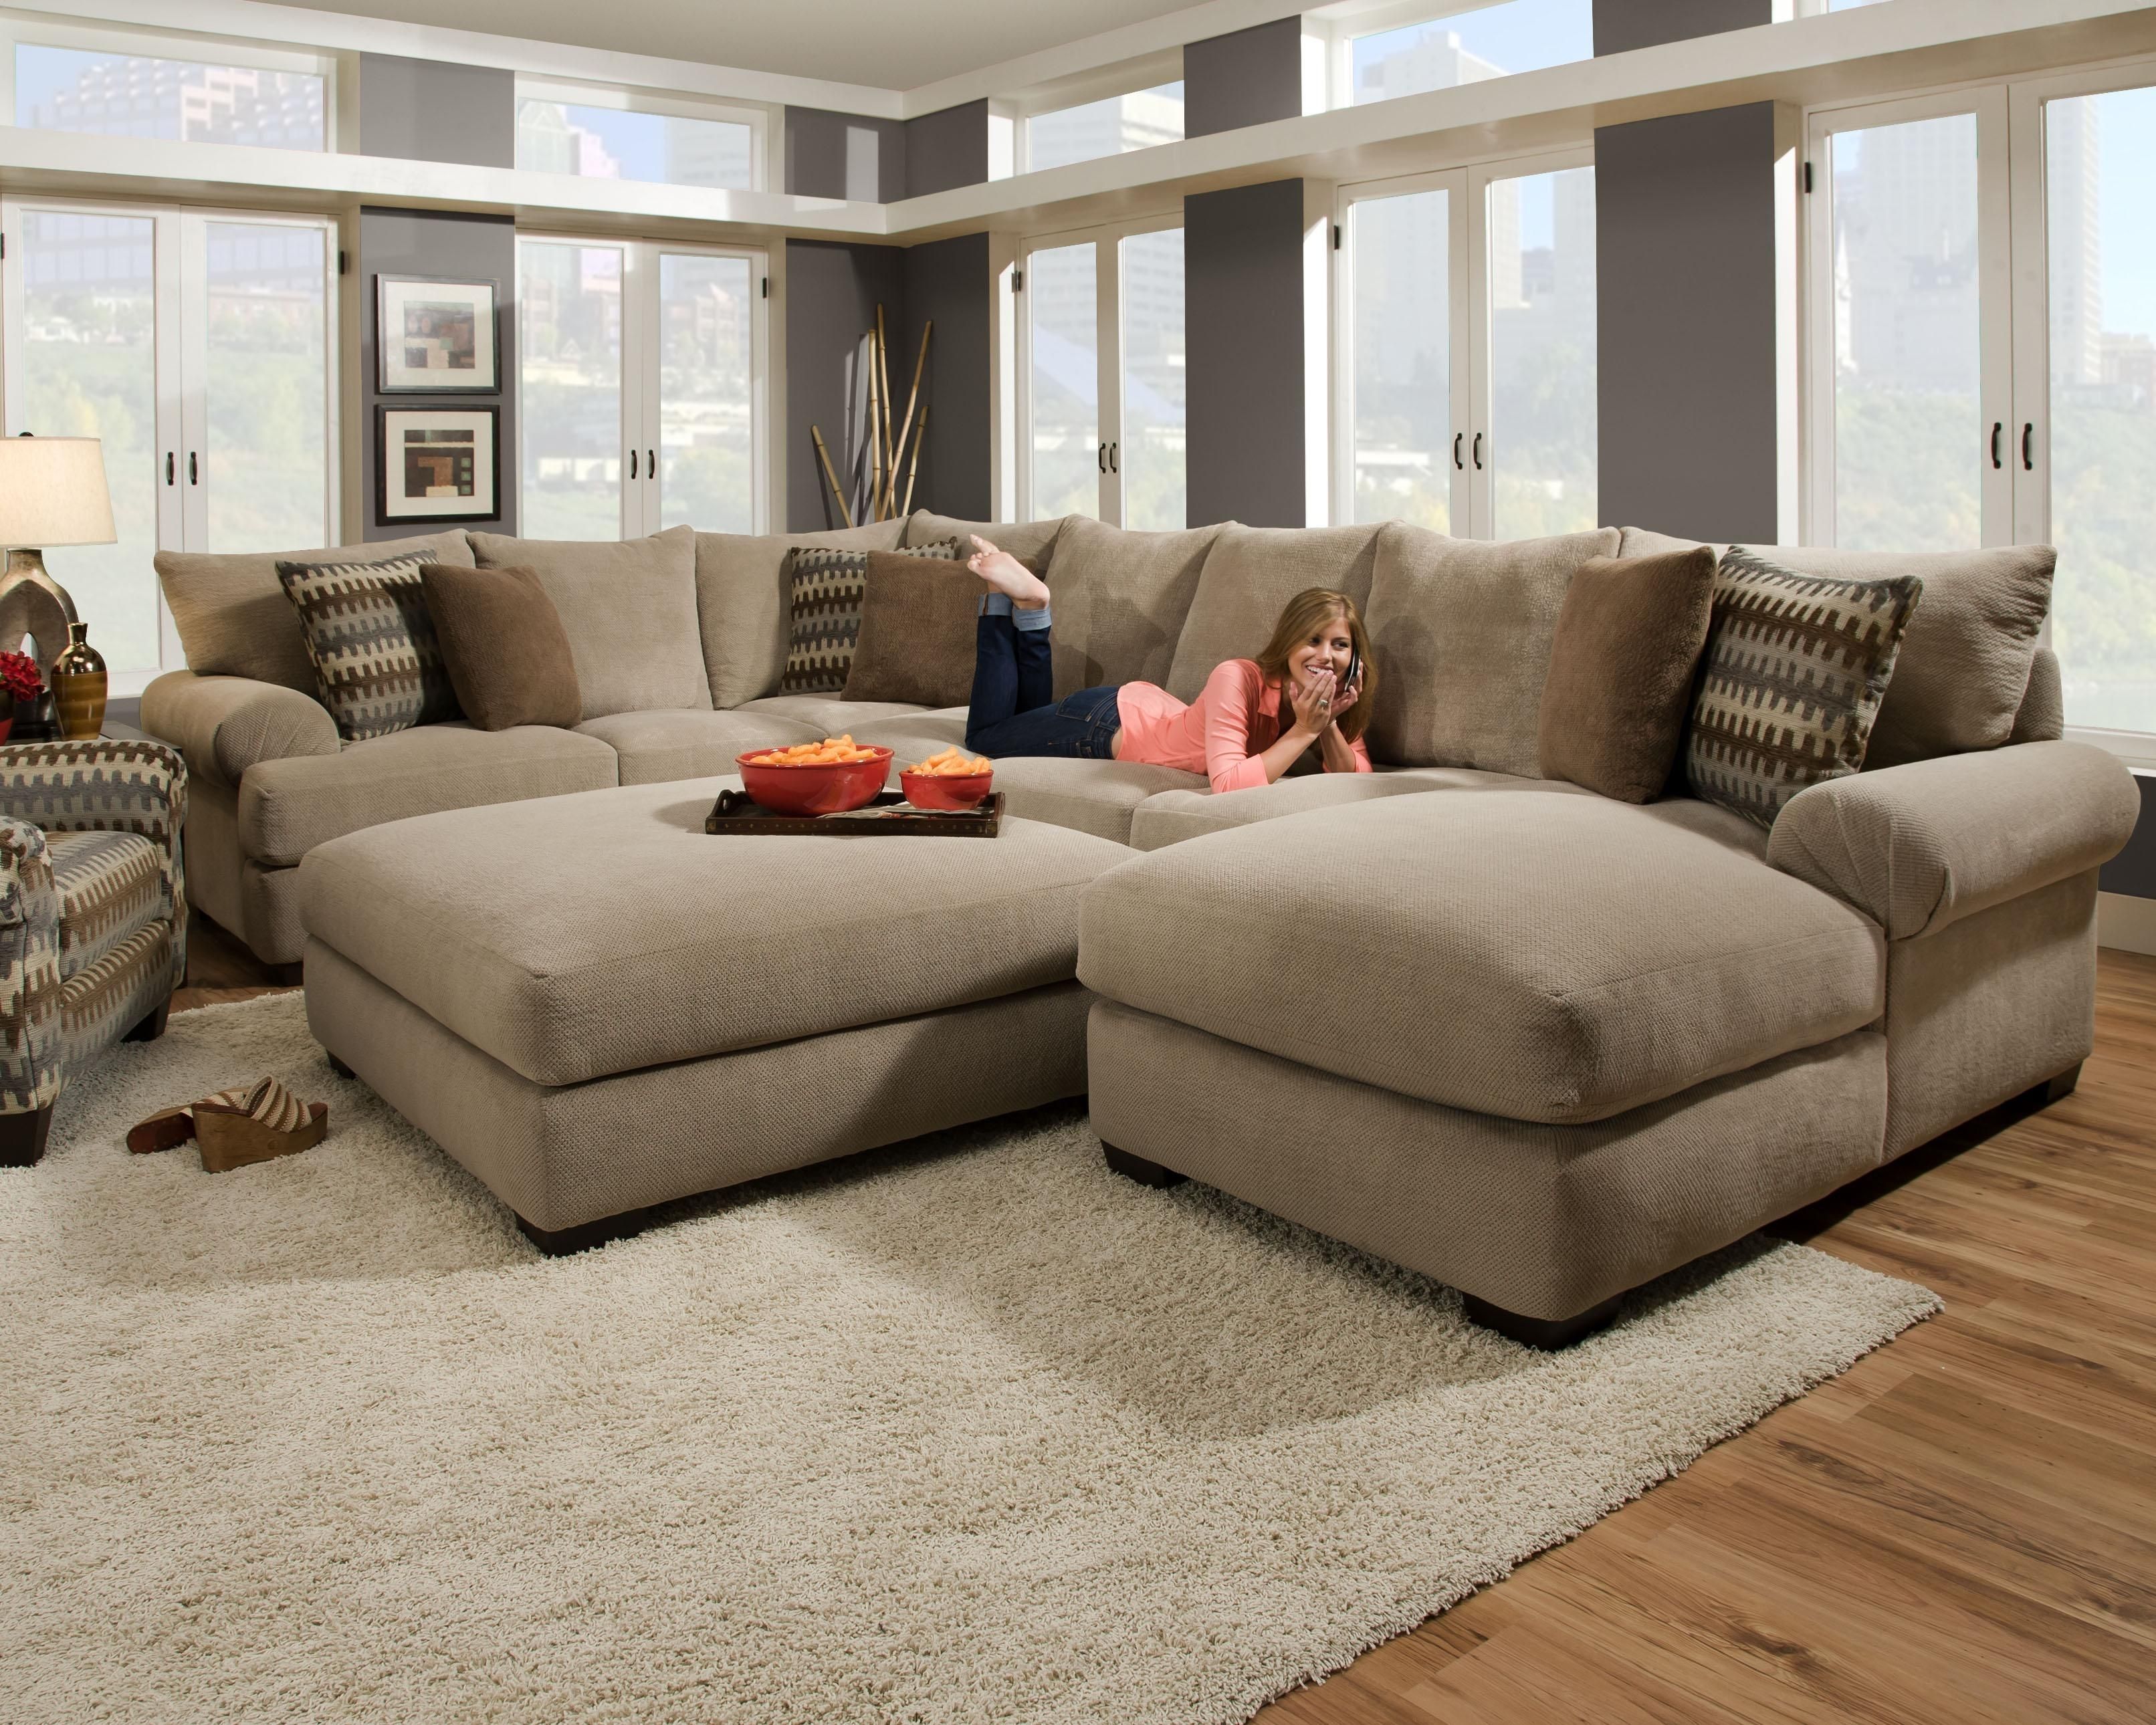 Furniture Design Idea For Living Room And Oversized U Shaped Regarding Sectional Sofas With Oversized Ottoman (View 4 of 15)